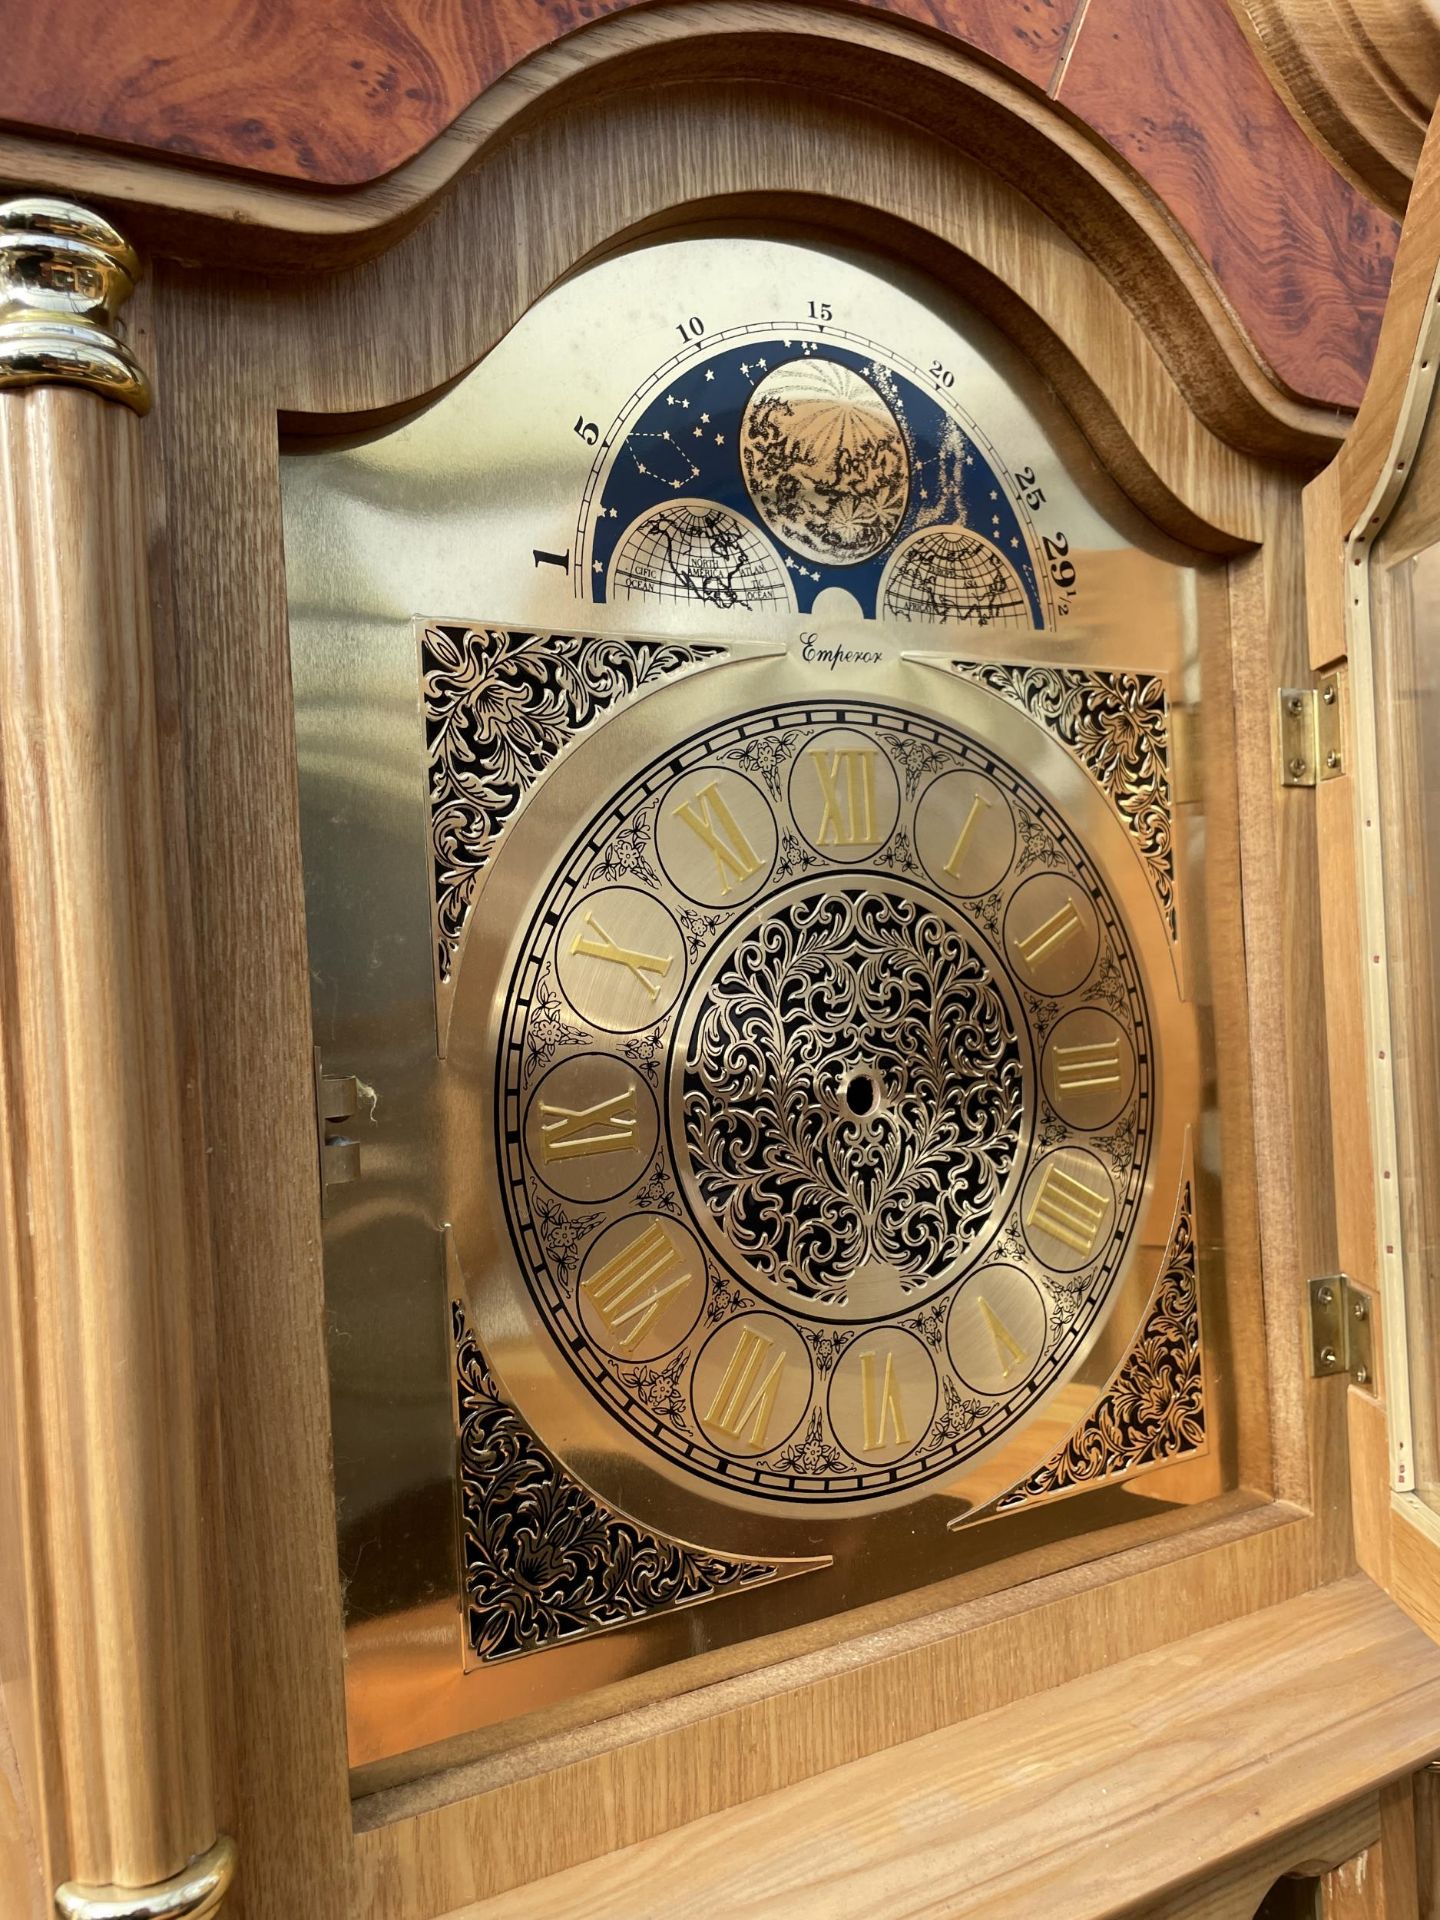 A MODERN EMPEROX PINE LONGCASE CLOCK WITH GLASS DOOR - Image 5 of 5